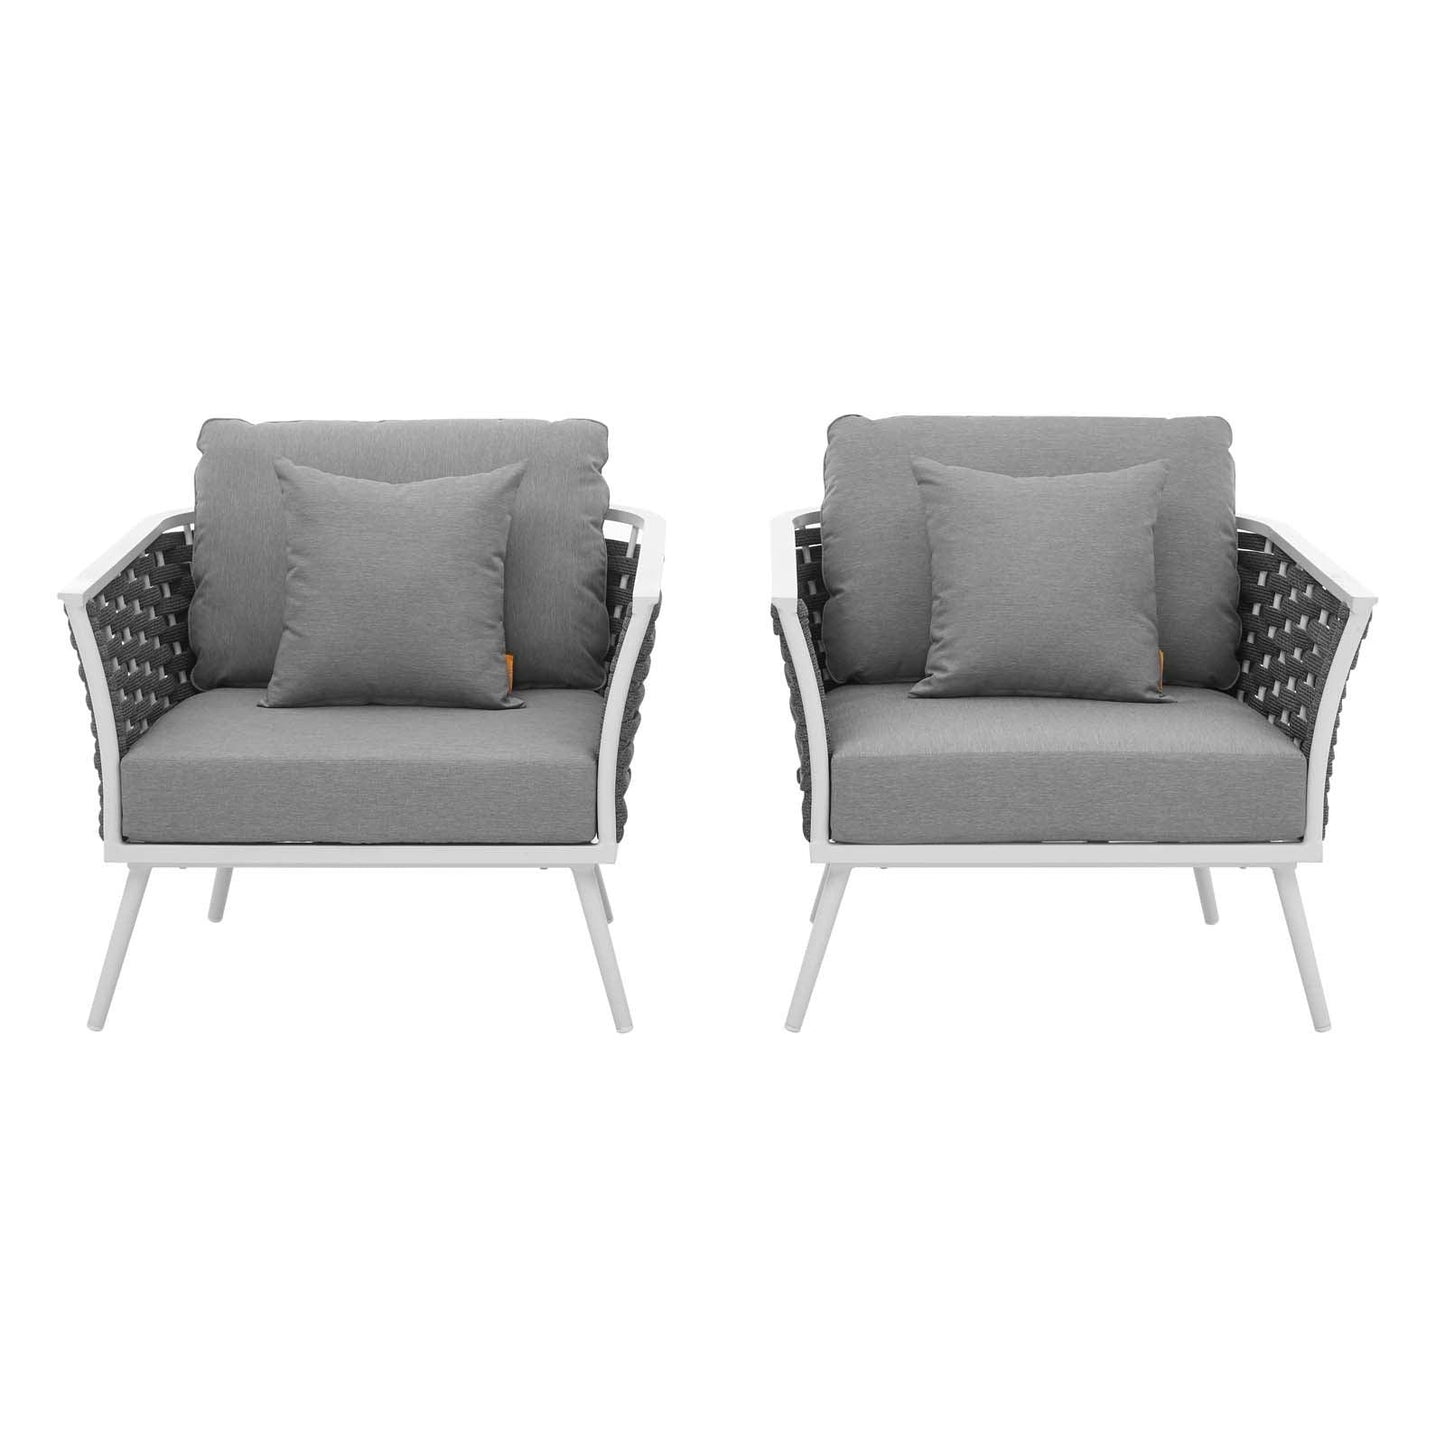 Modway Stance Armchair Outdoor Patio Aluminum Set of 2 FredCo